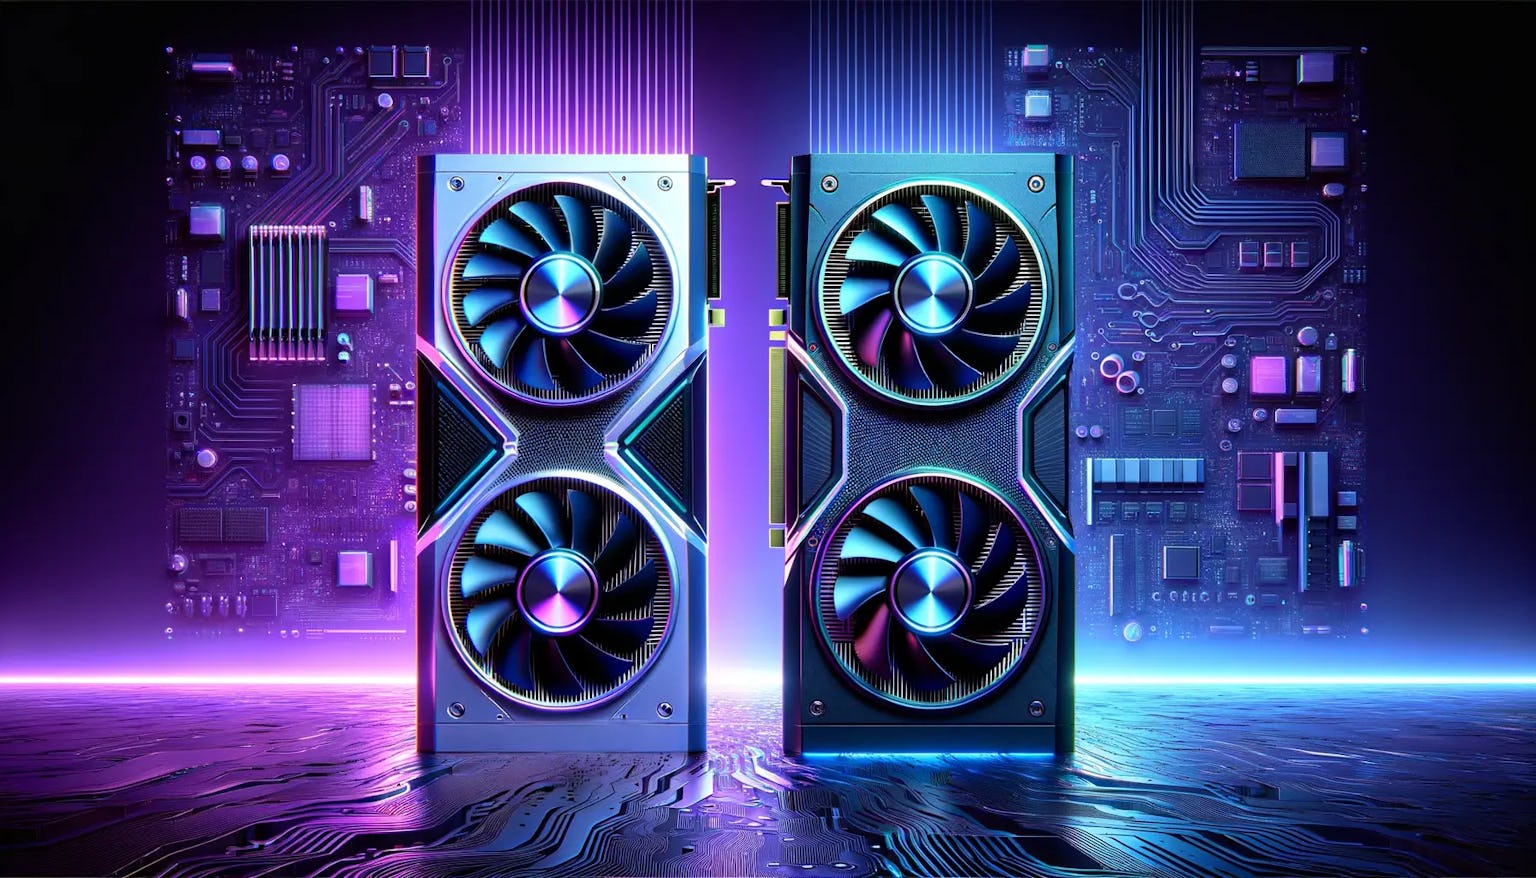 NVIDIA H100 vs H200: How Will They Compare? cover photo